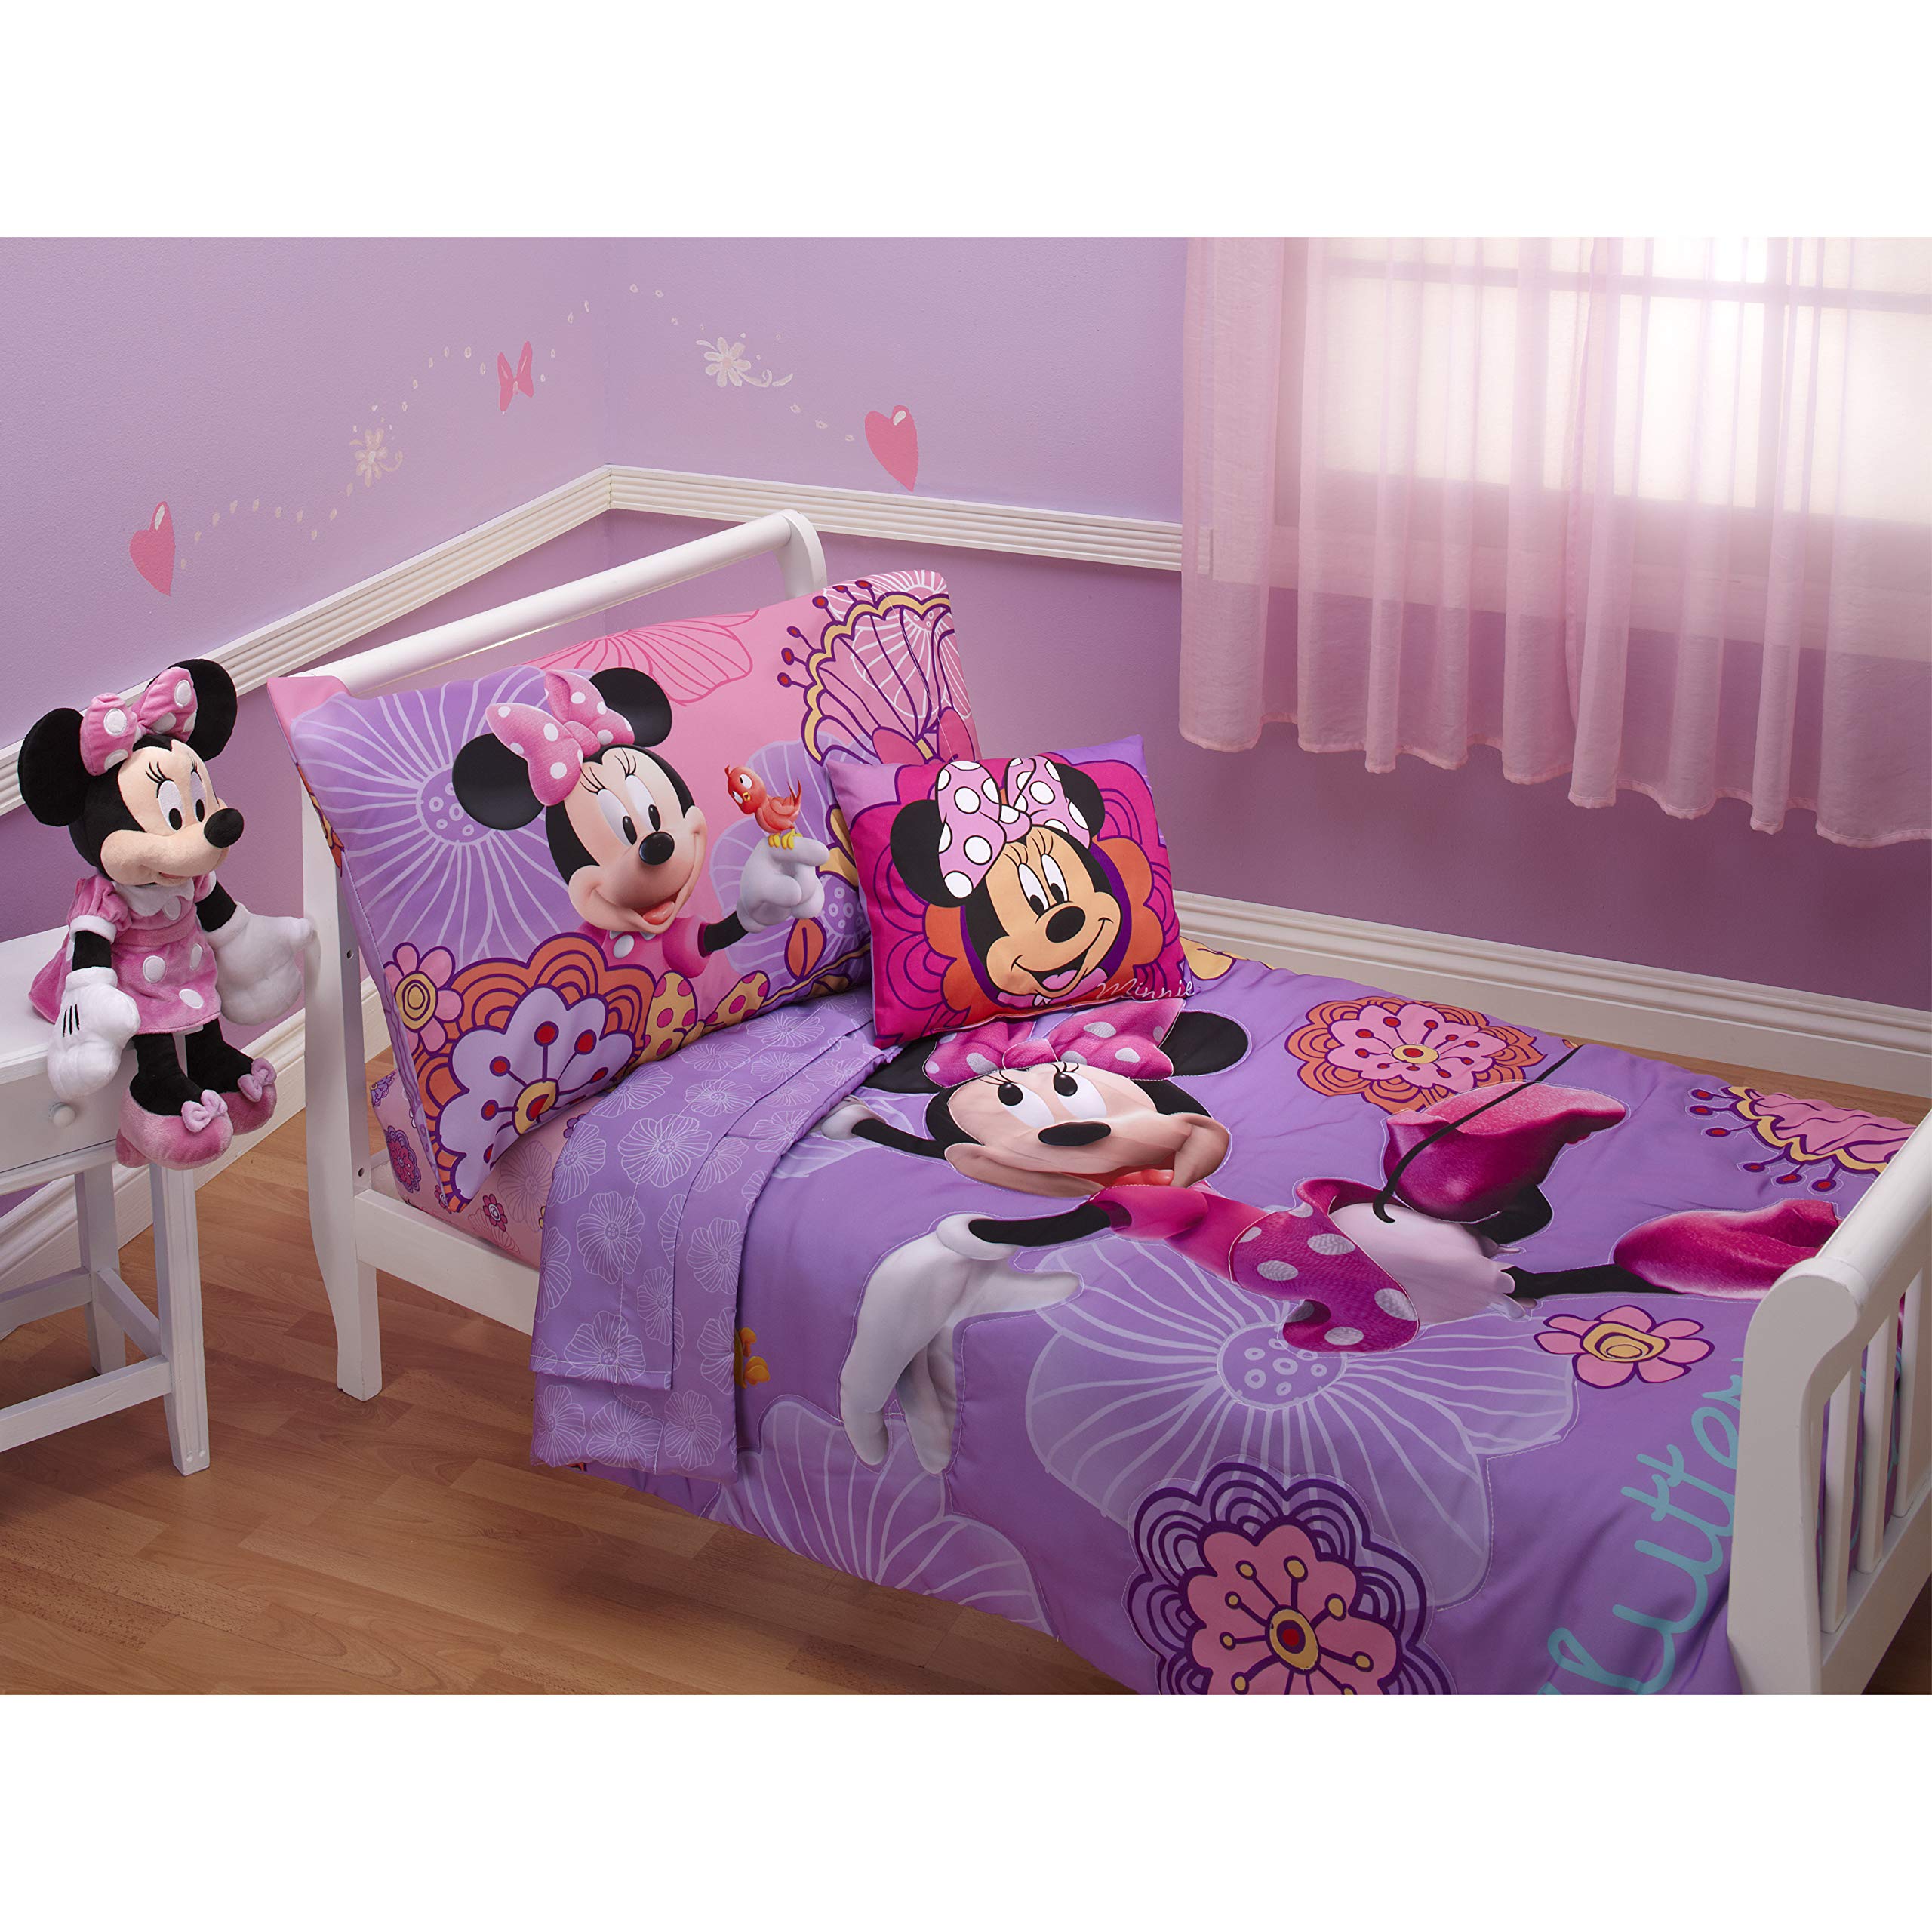 Book Cover Disney 4 Piece Minnie's Fluttery Friends Toddler Bedding Set, Lavender, 3.5 x 10 x 13 inch (Pack of 1) Multicolor